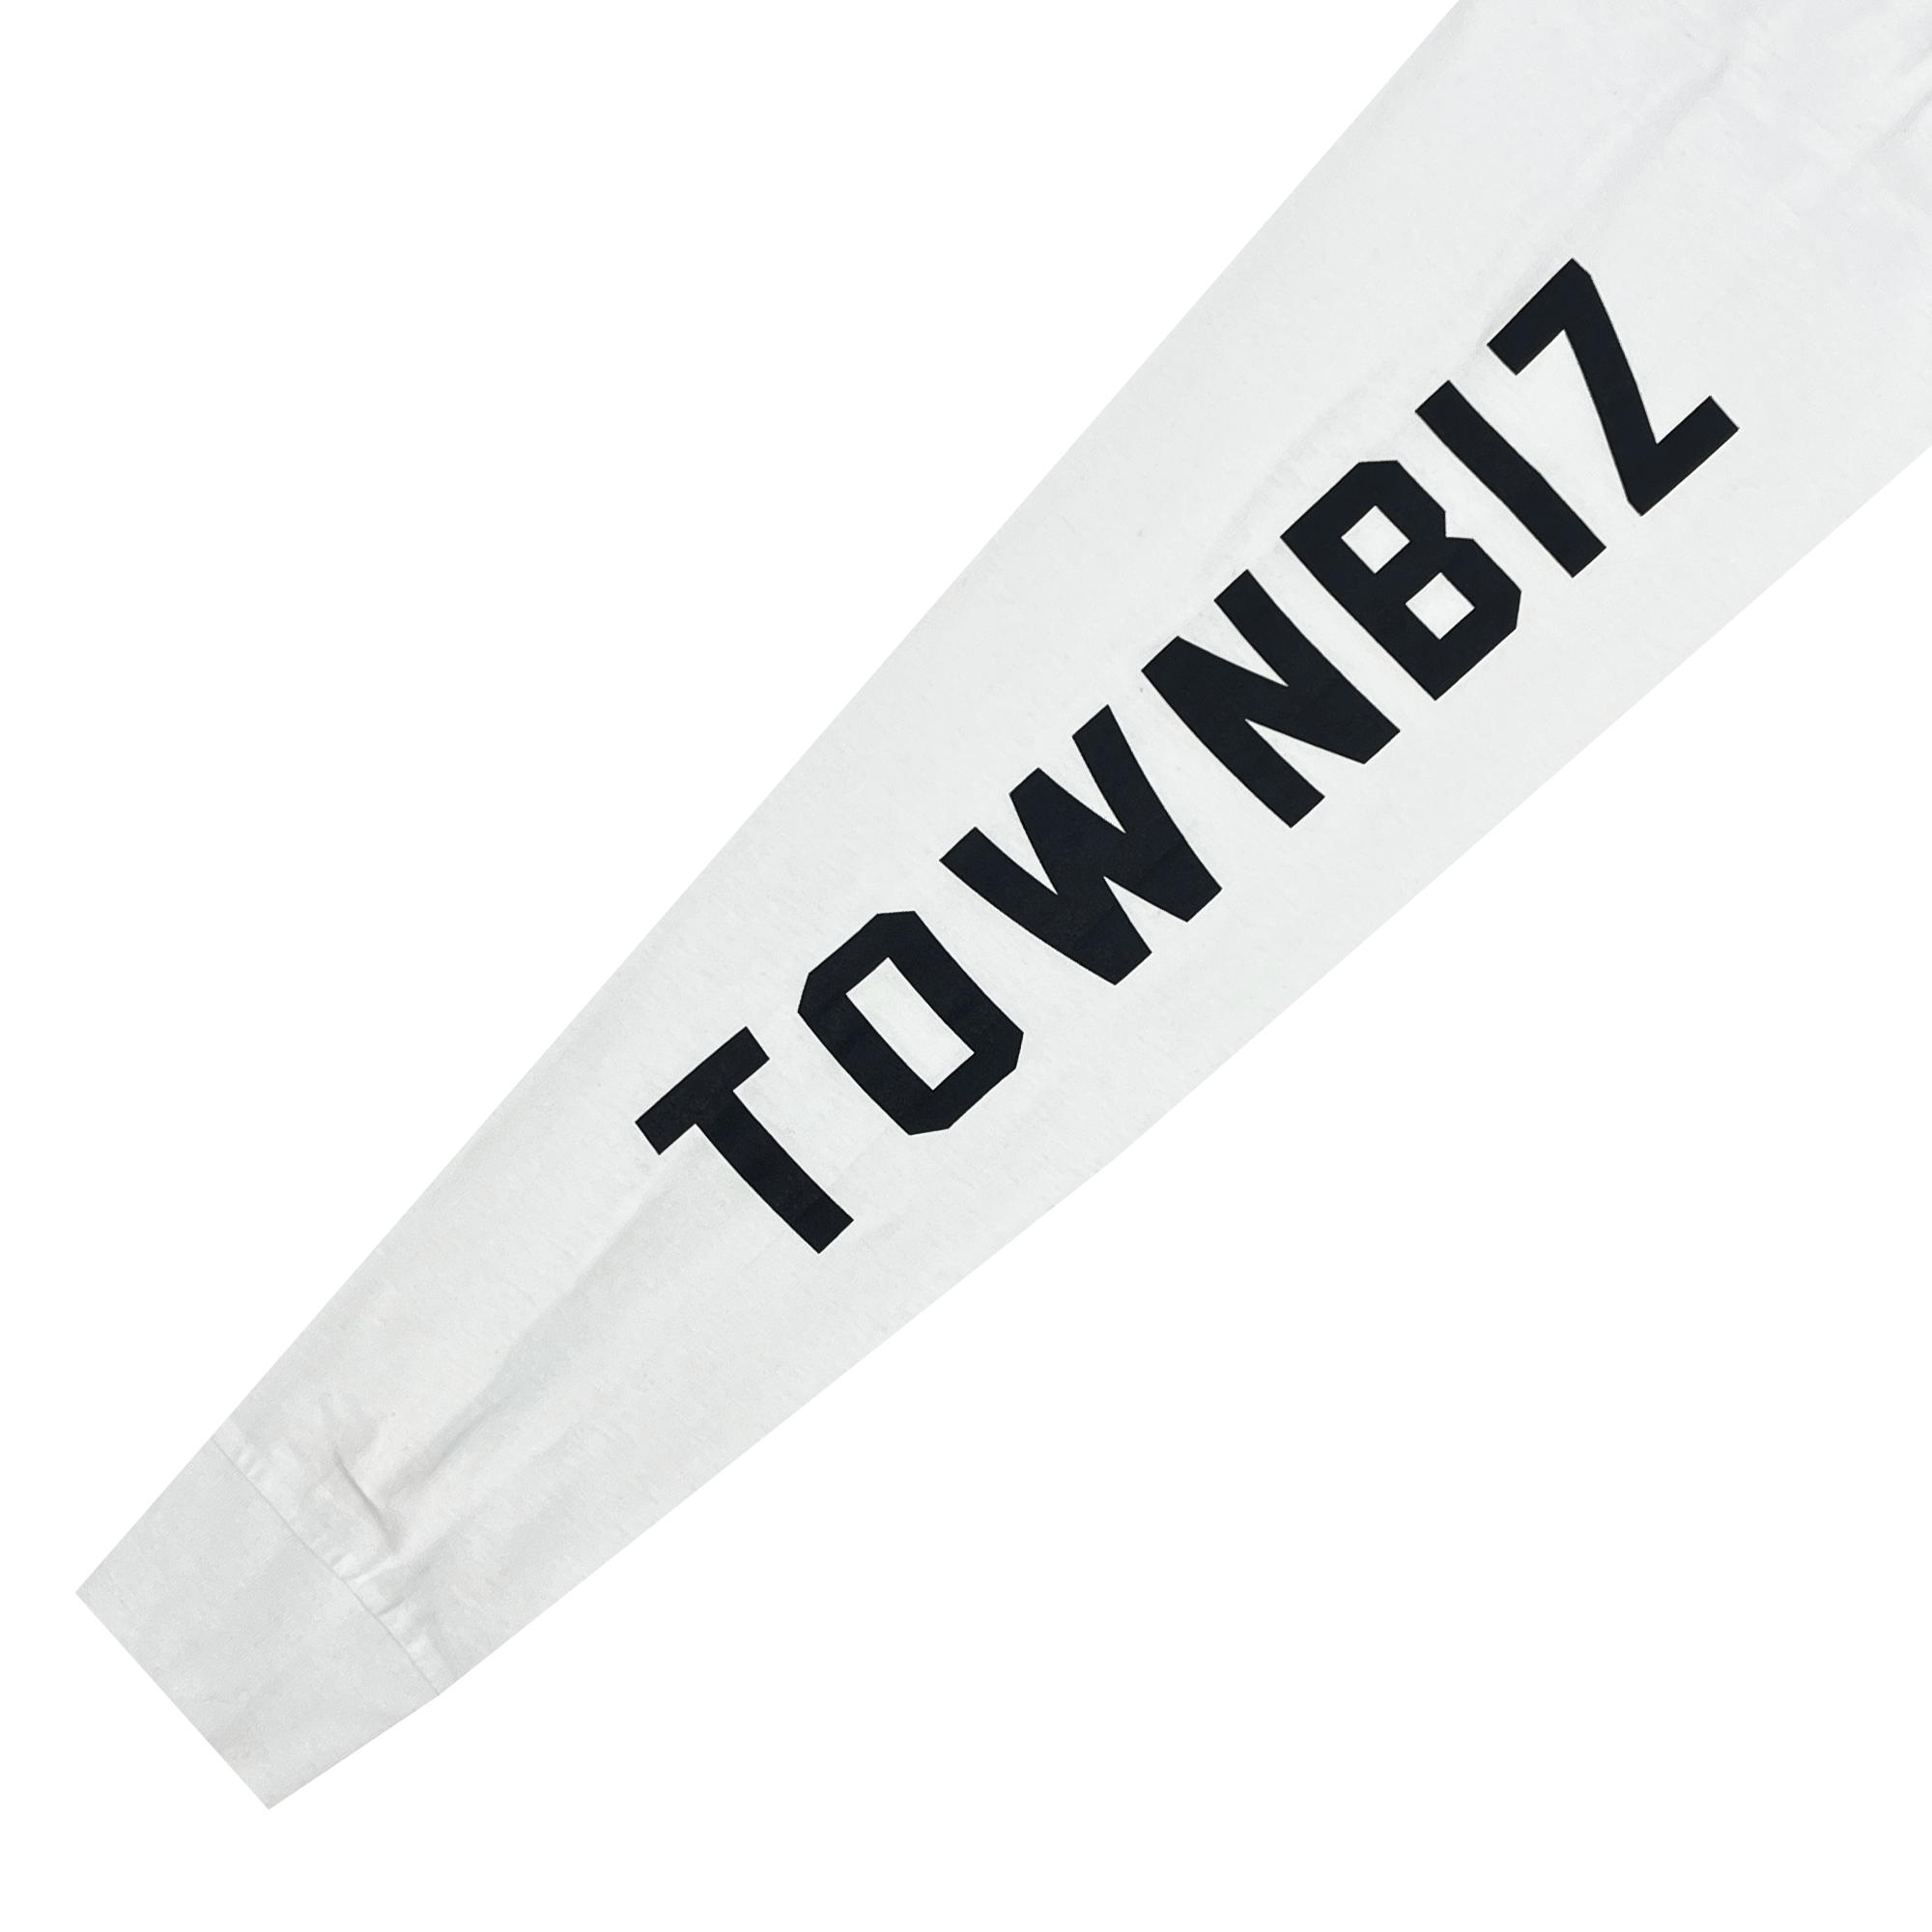 Close-up of a white long-sleeve shirt sleeve with a large black TOWNBIZ wordmark.